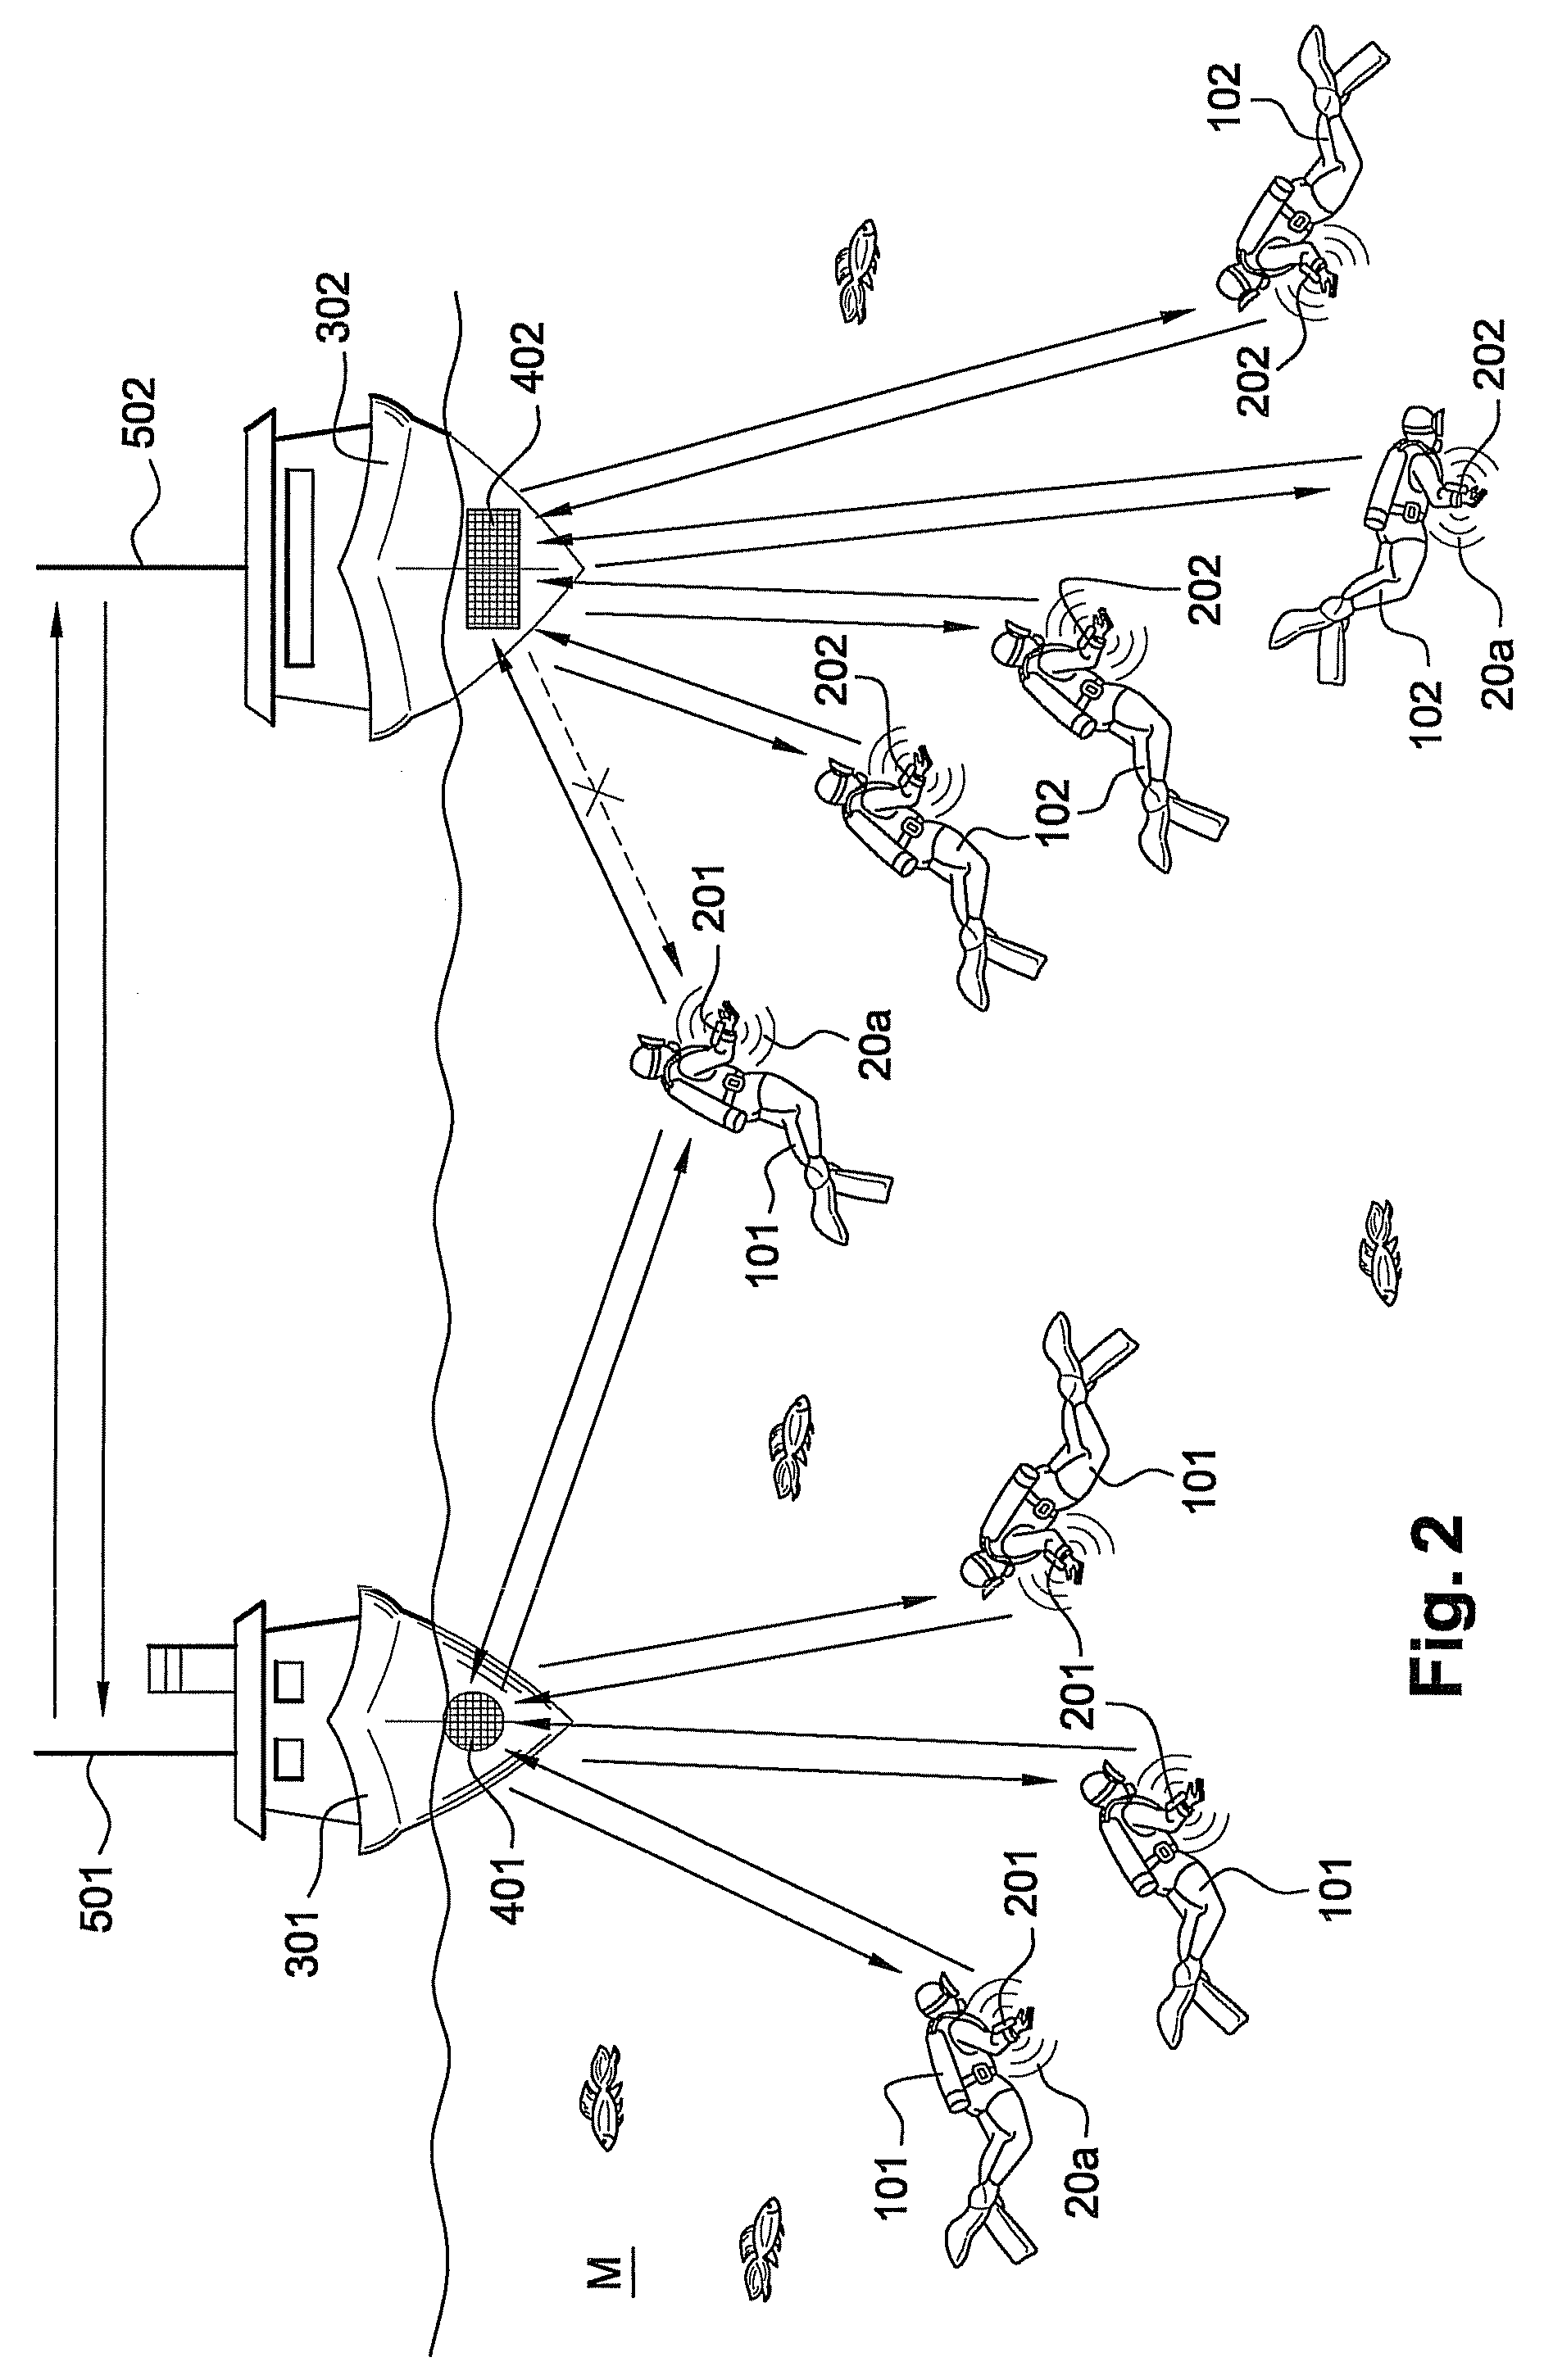 Signalling and localization device for an individual in the sea and method of use thereof